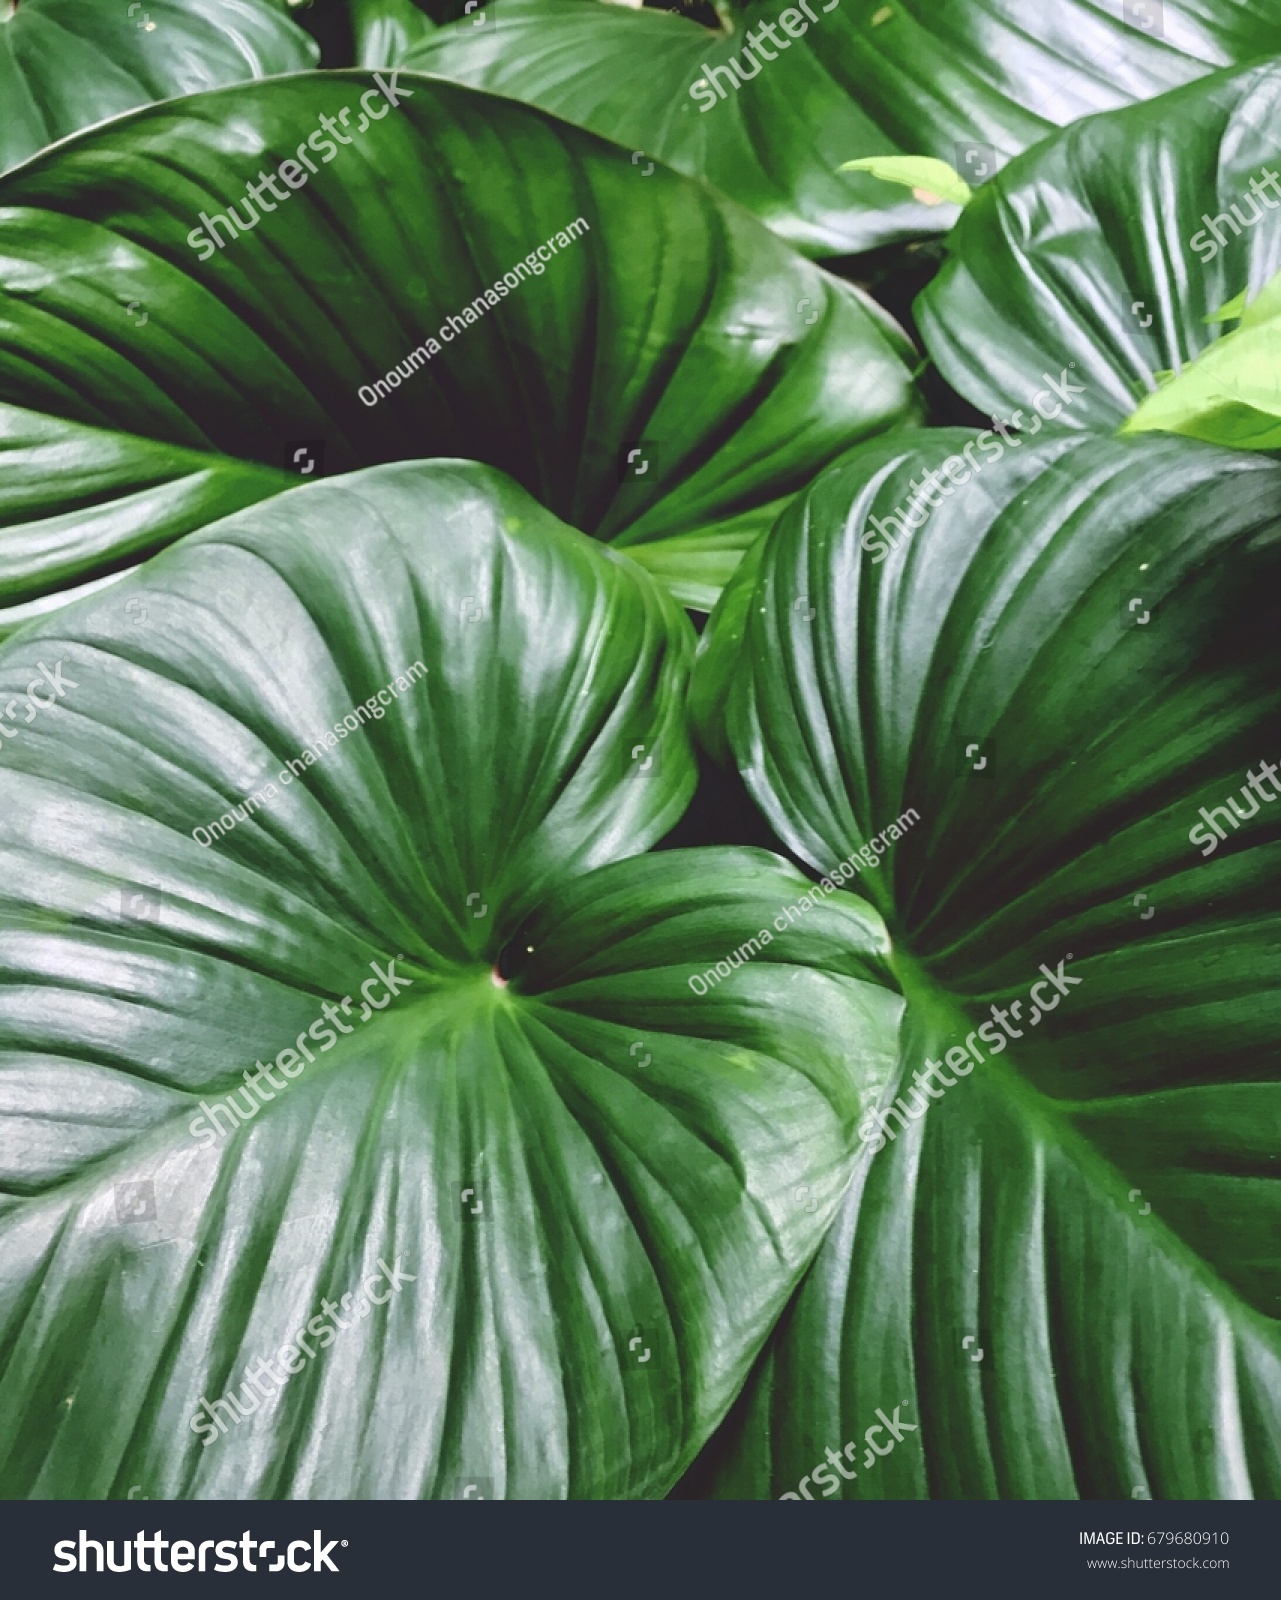 Layer Green Leaf Nature Wallpaper Background Stock Photo 679680910